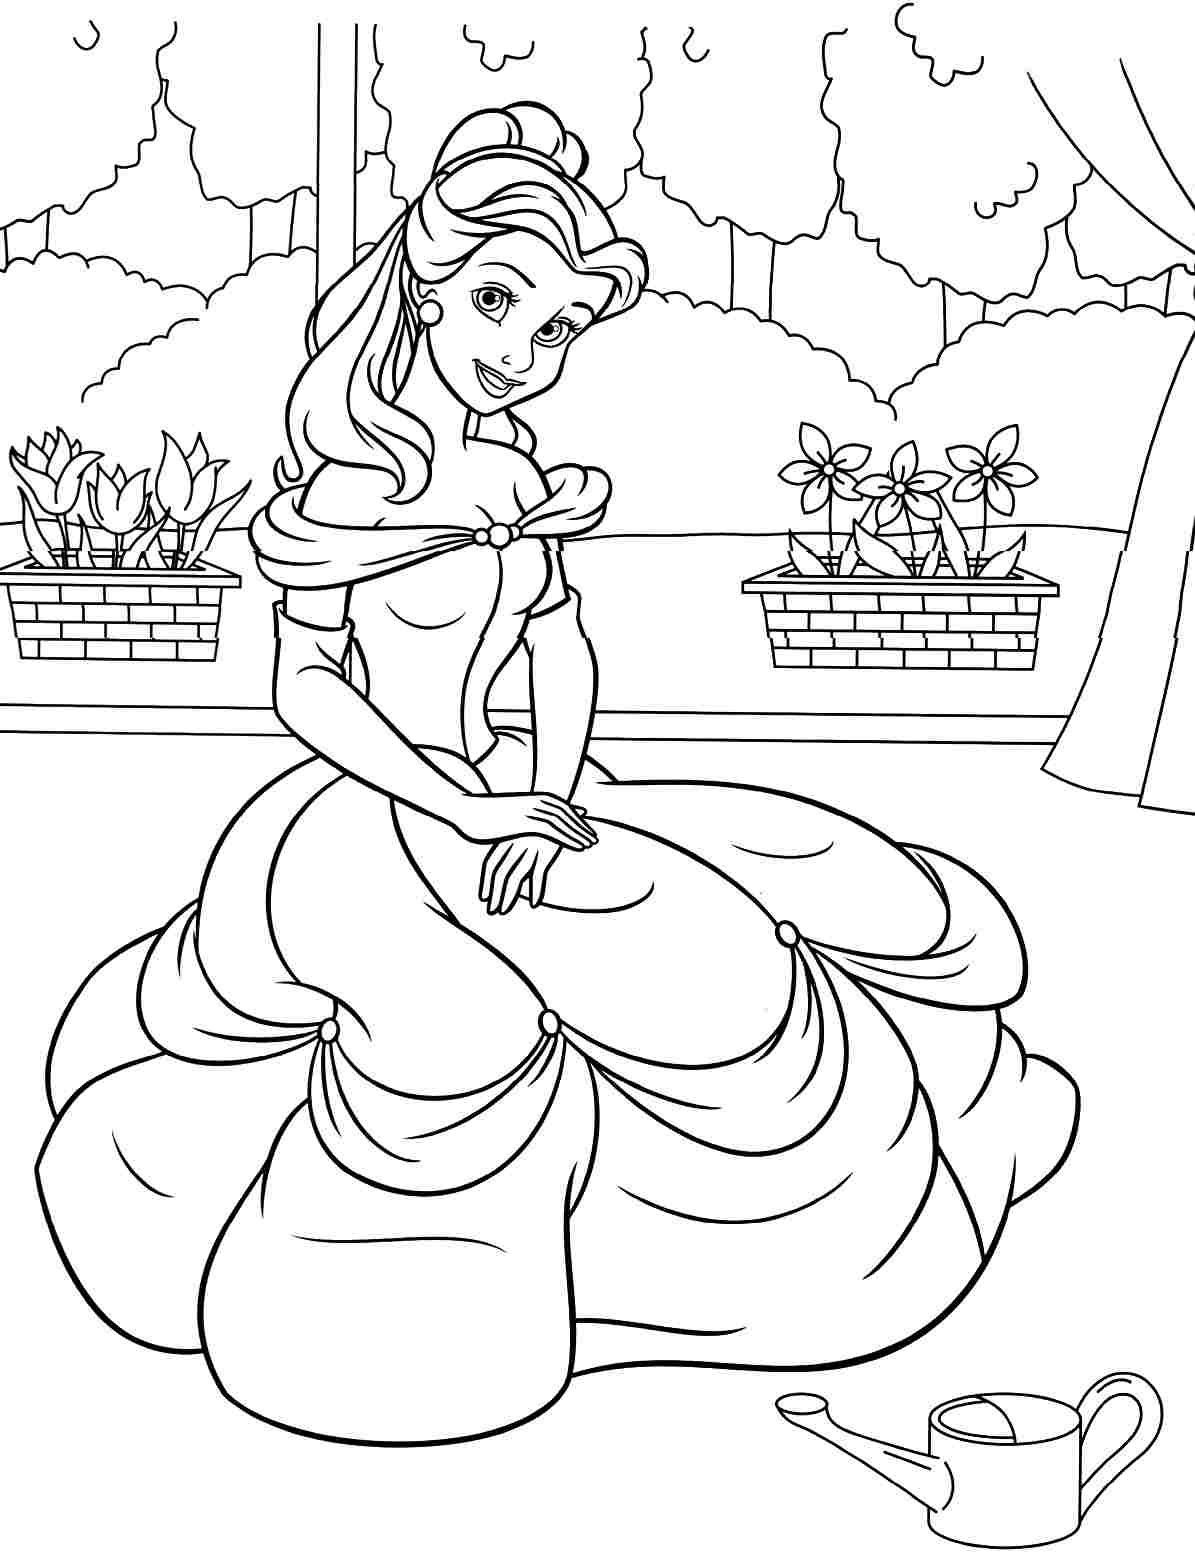 Free Printable Coloring Pages Disney
 Free Printable Belle Coloring Pages For Kids